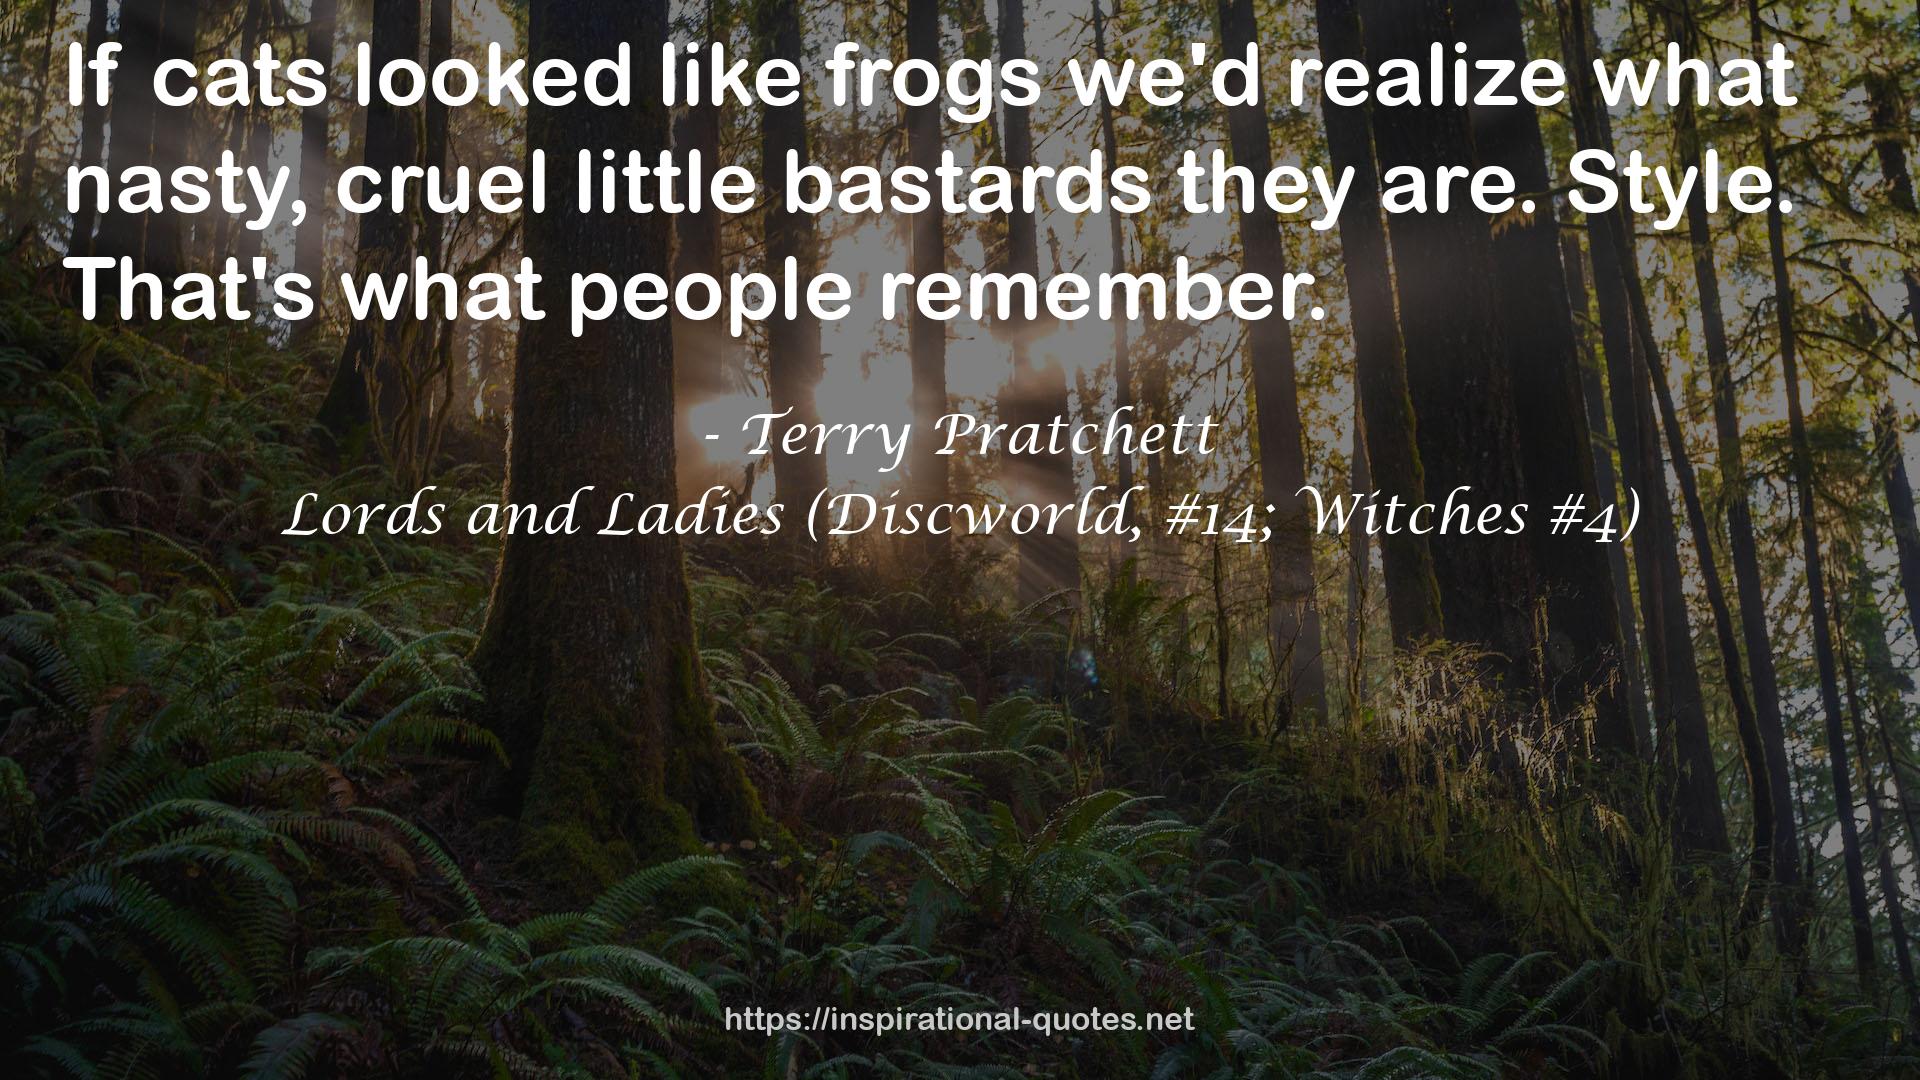 Lords and Ladies (Discworld, #14; Witches #4) QUOTES